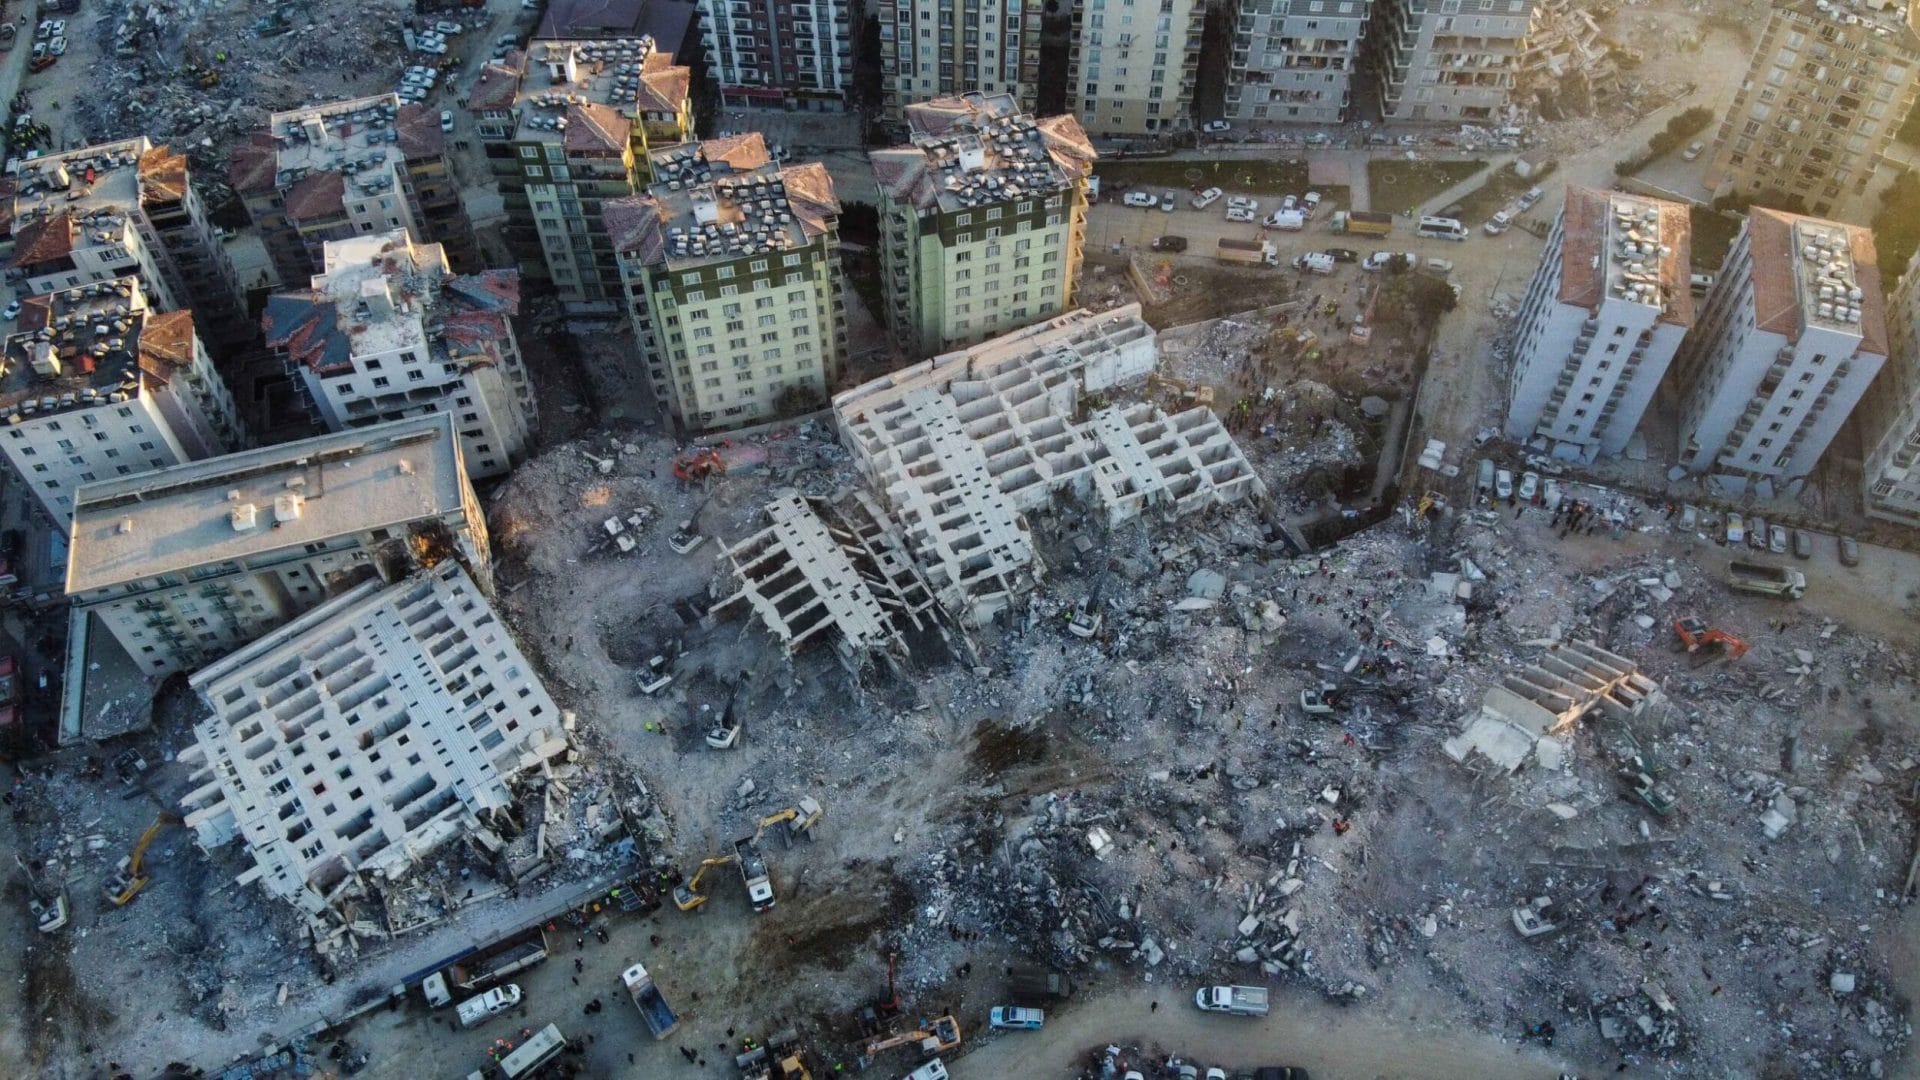 An aerial view of Rönesans Residence, which collapsed during the earthquakes. Over 700 people were living at the apartment block at the time